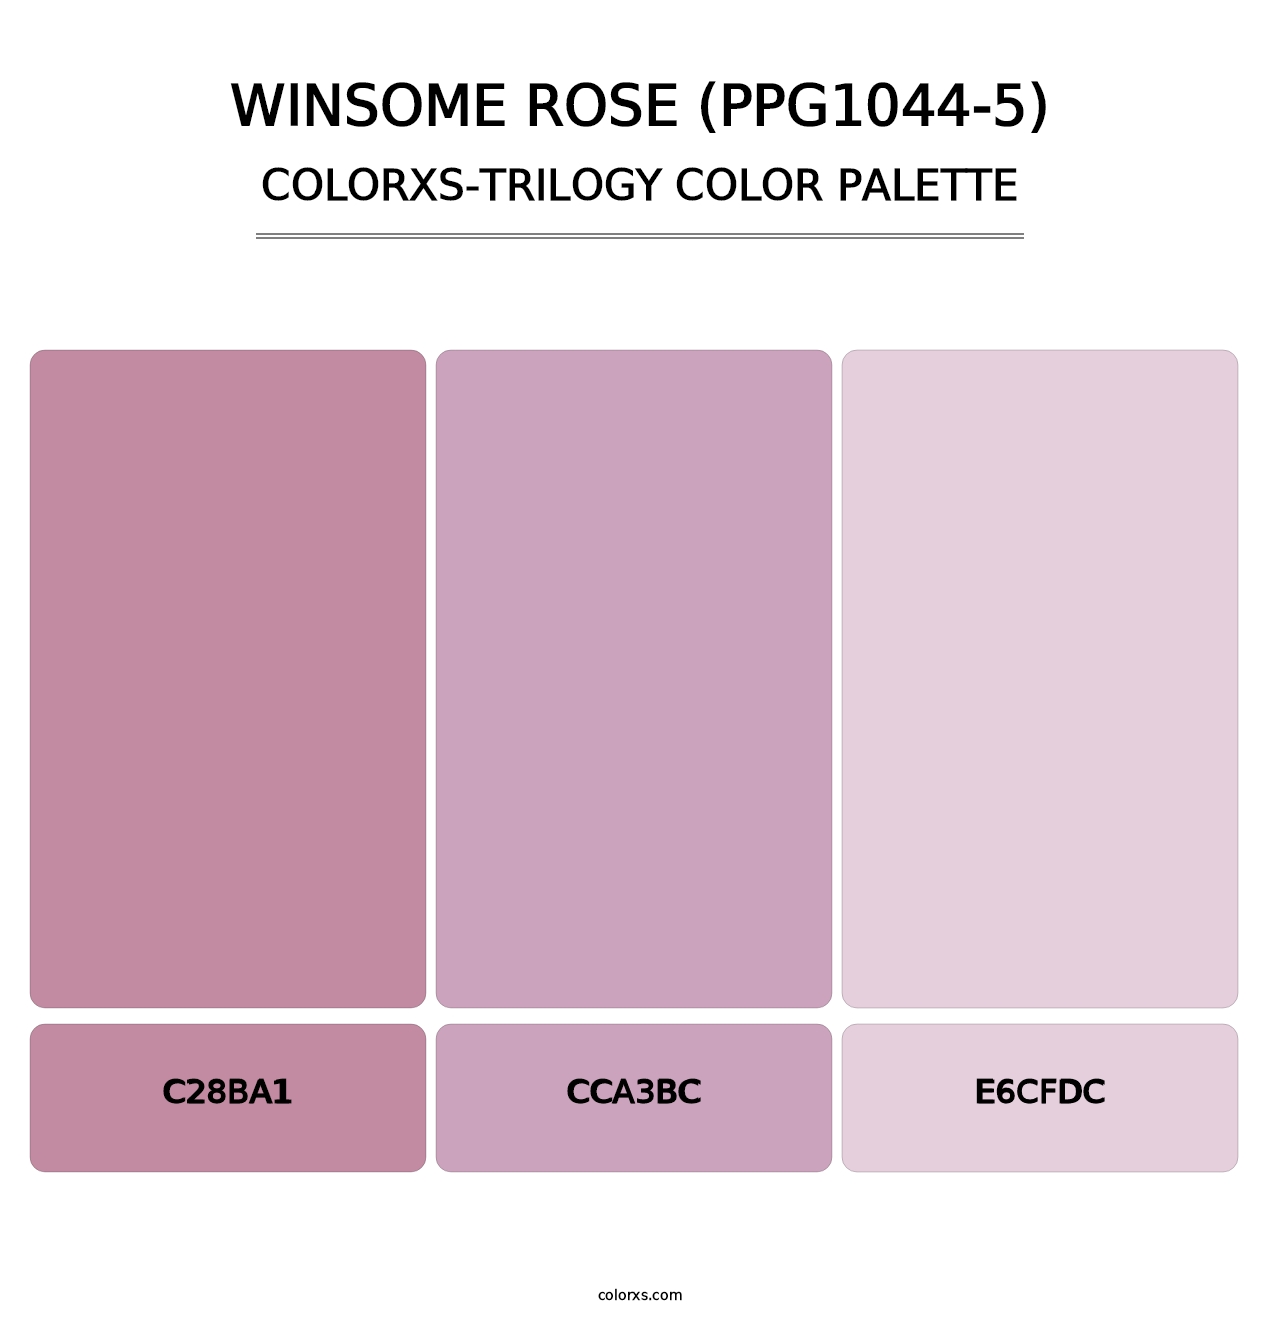 Winsome Rose (PPG1044-5) - Colorxs Trilogy Palette